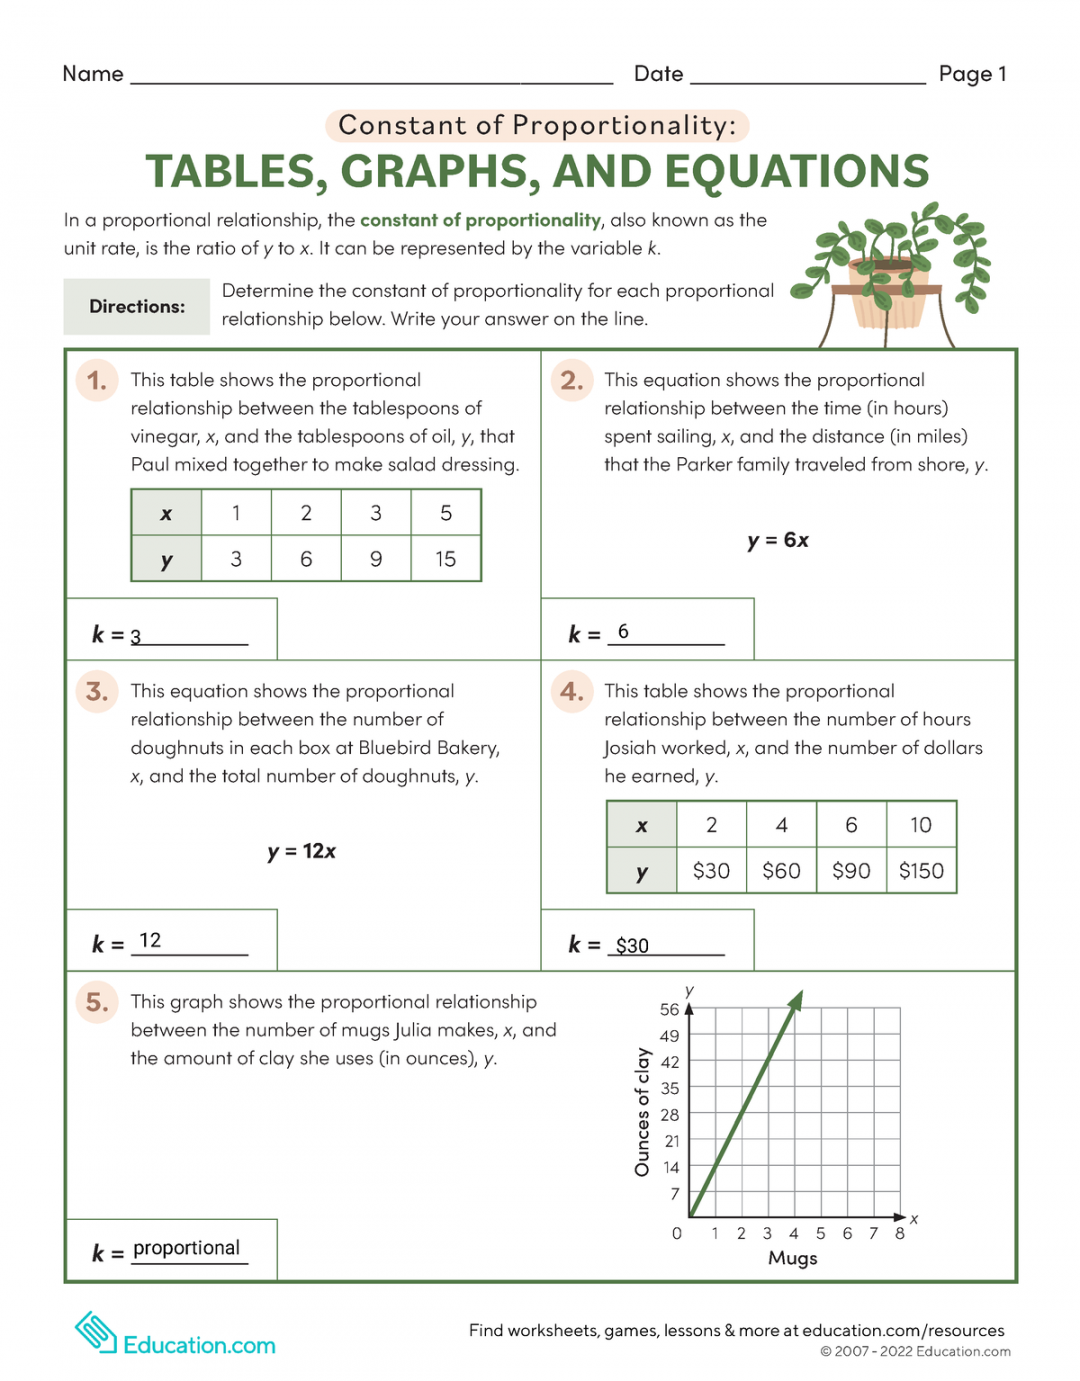 constant-of-proportionality-tables-graphs-and-equations - Constant